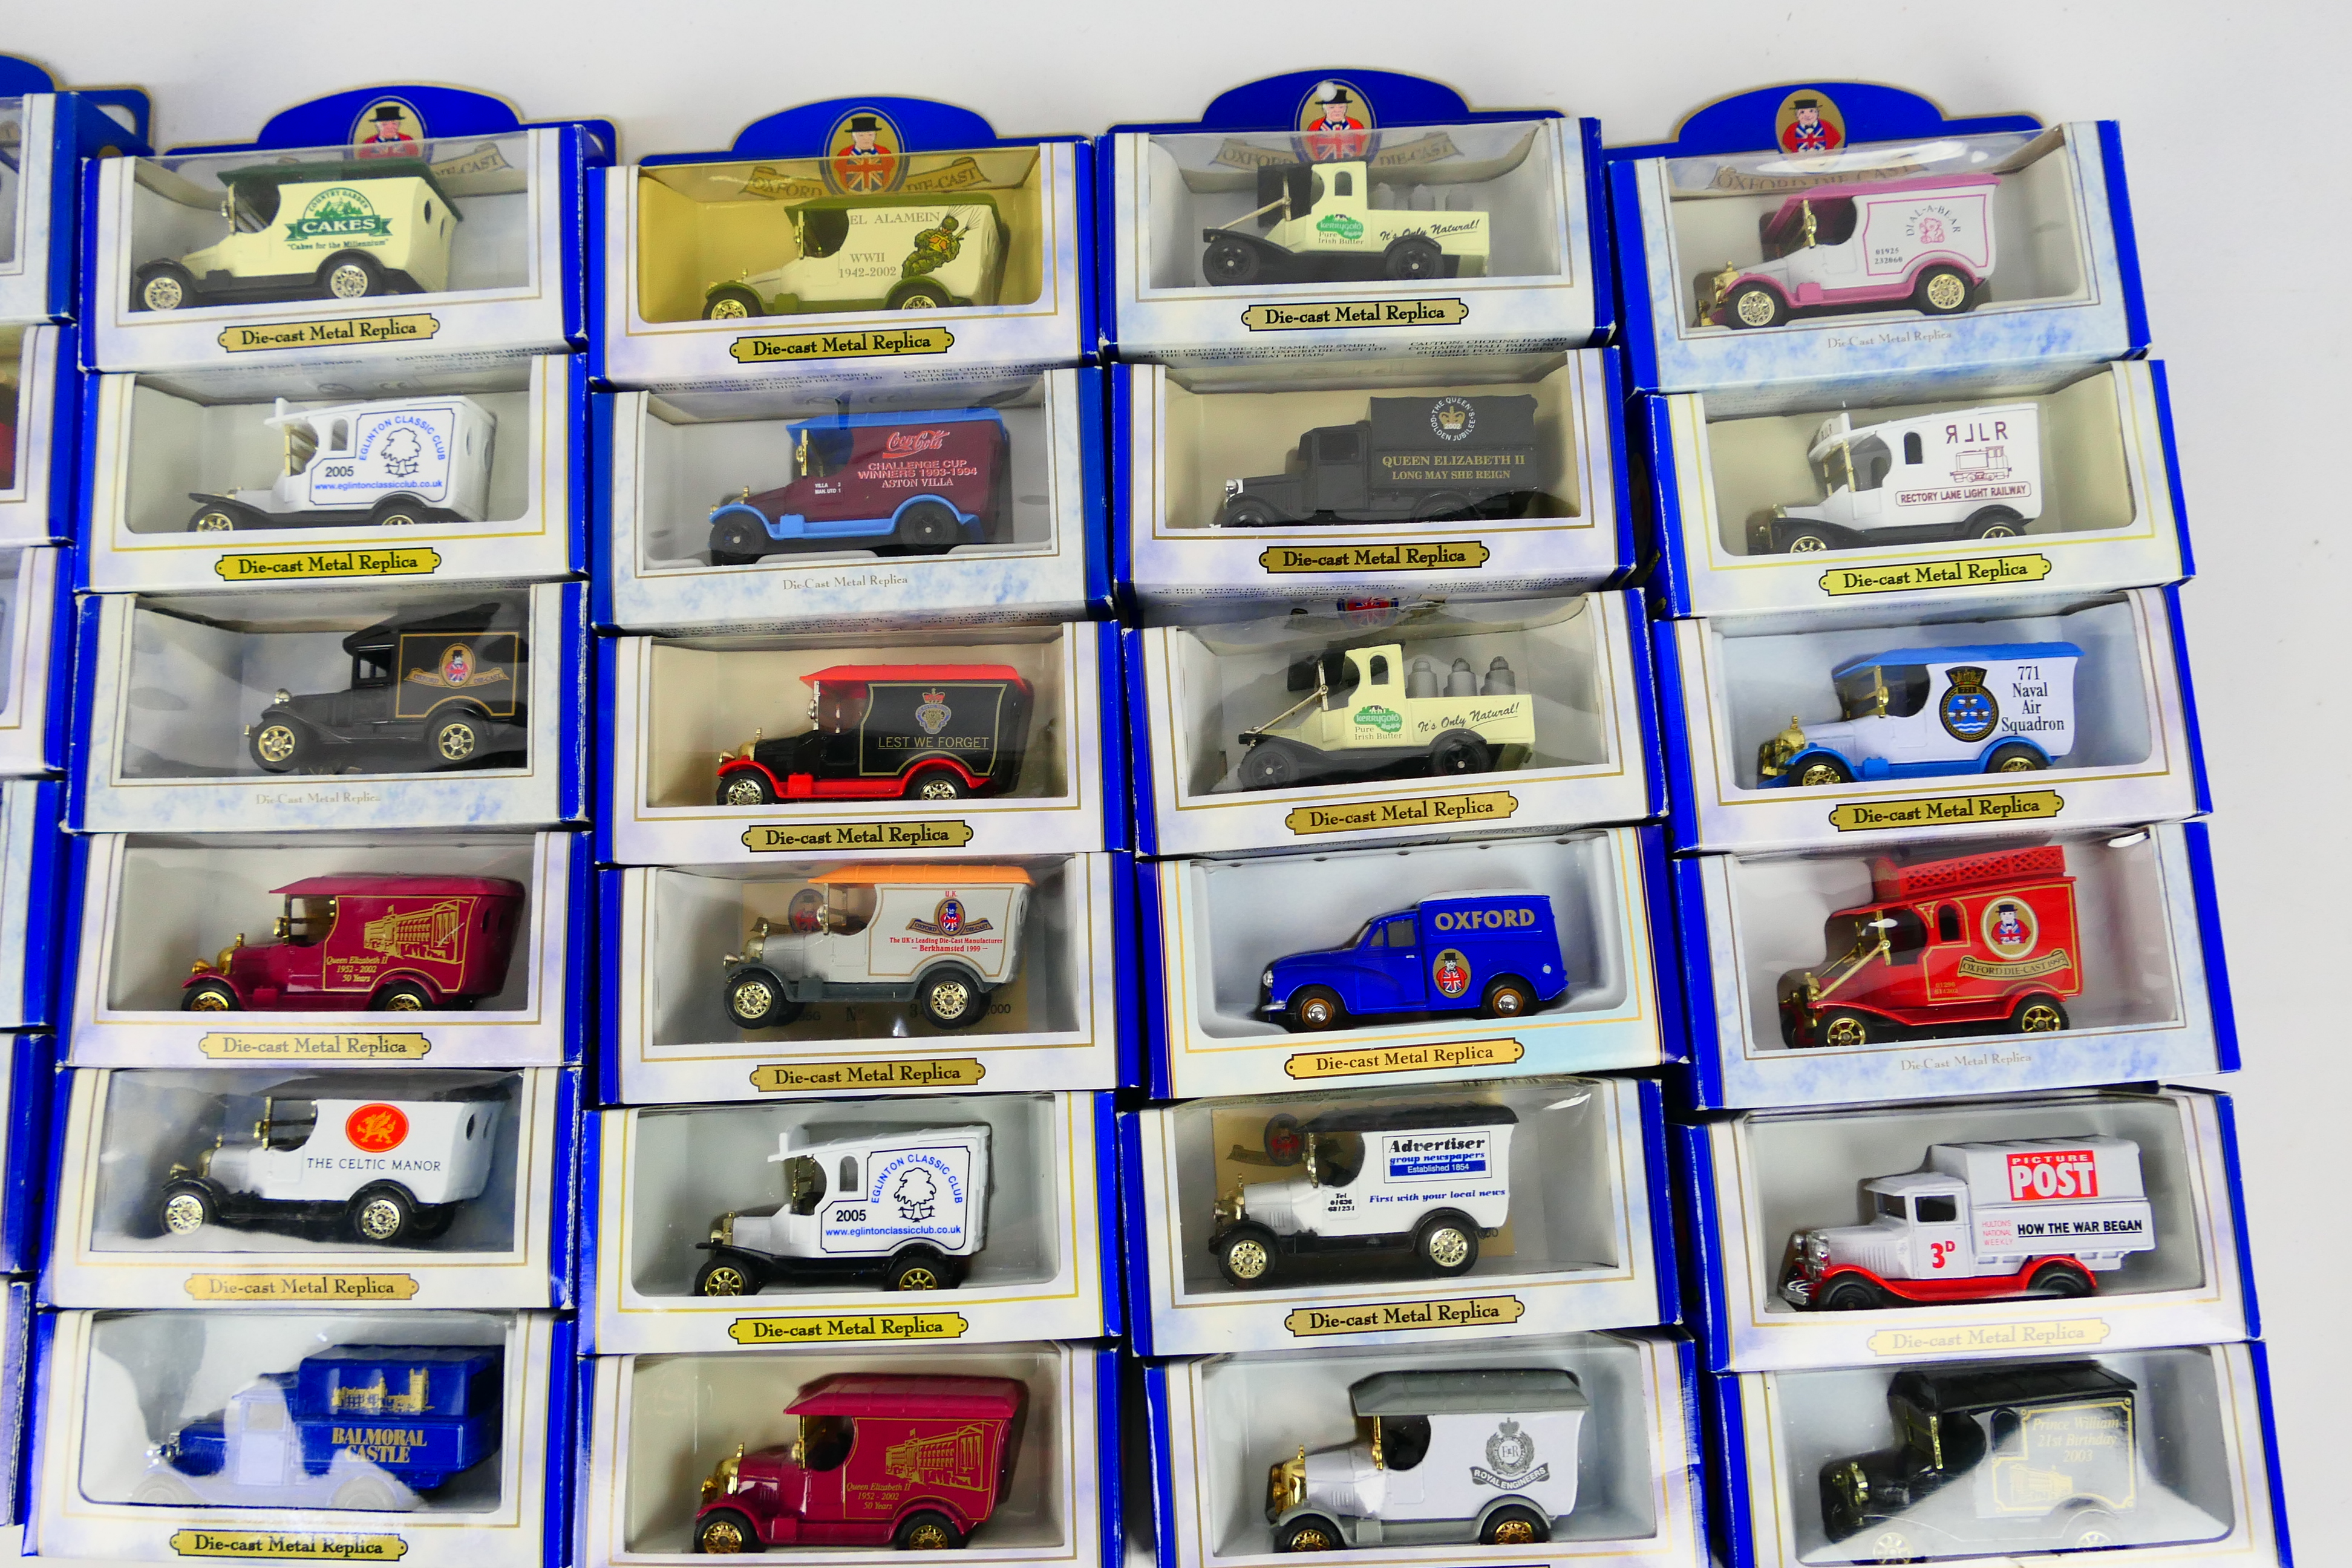 Oxford Diecast - A collection of 30 Oxford Diecast Metal vehicles including Queen Elizabeth II - Image 3 of 3